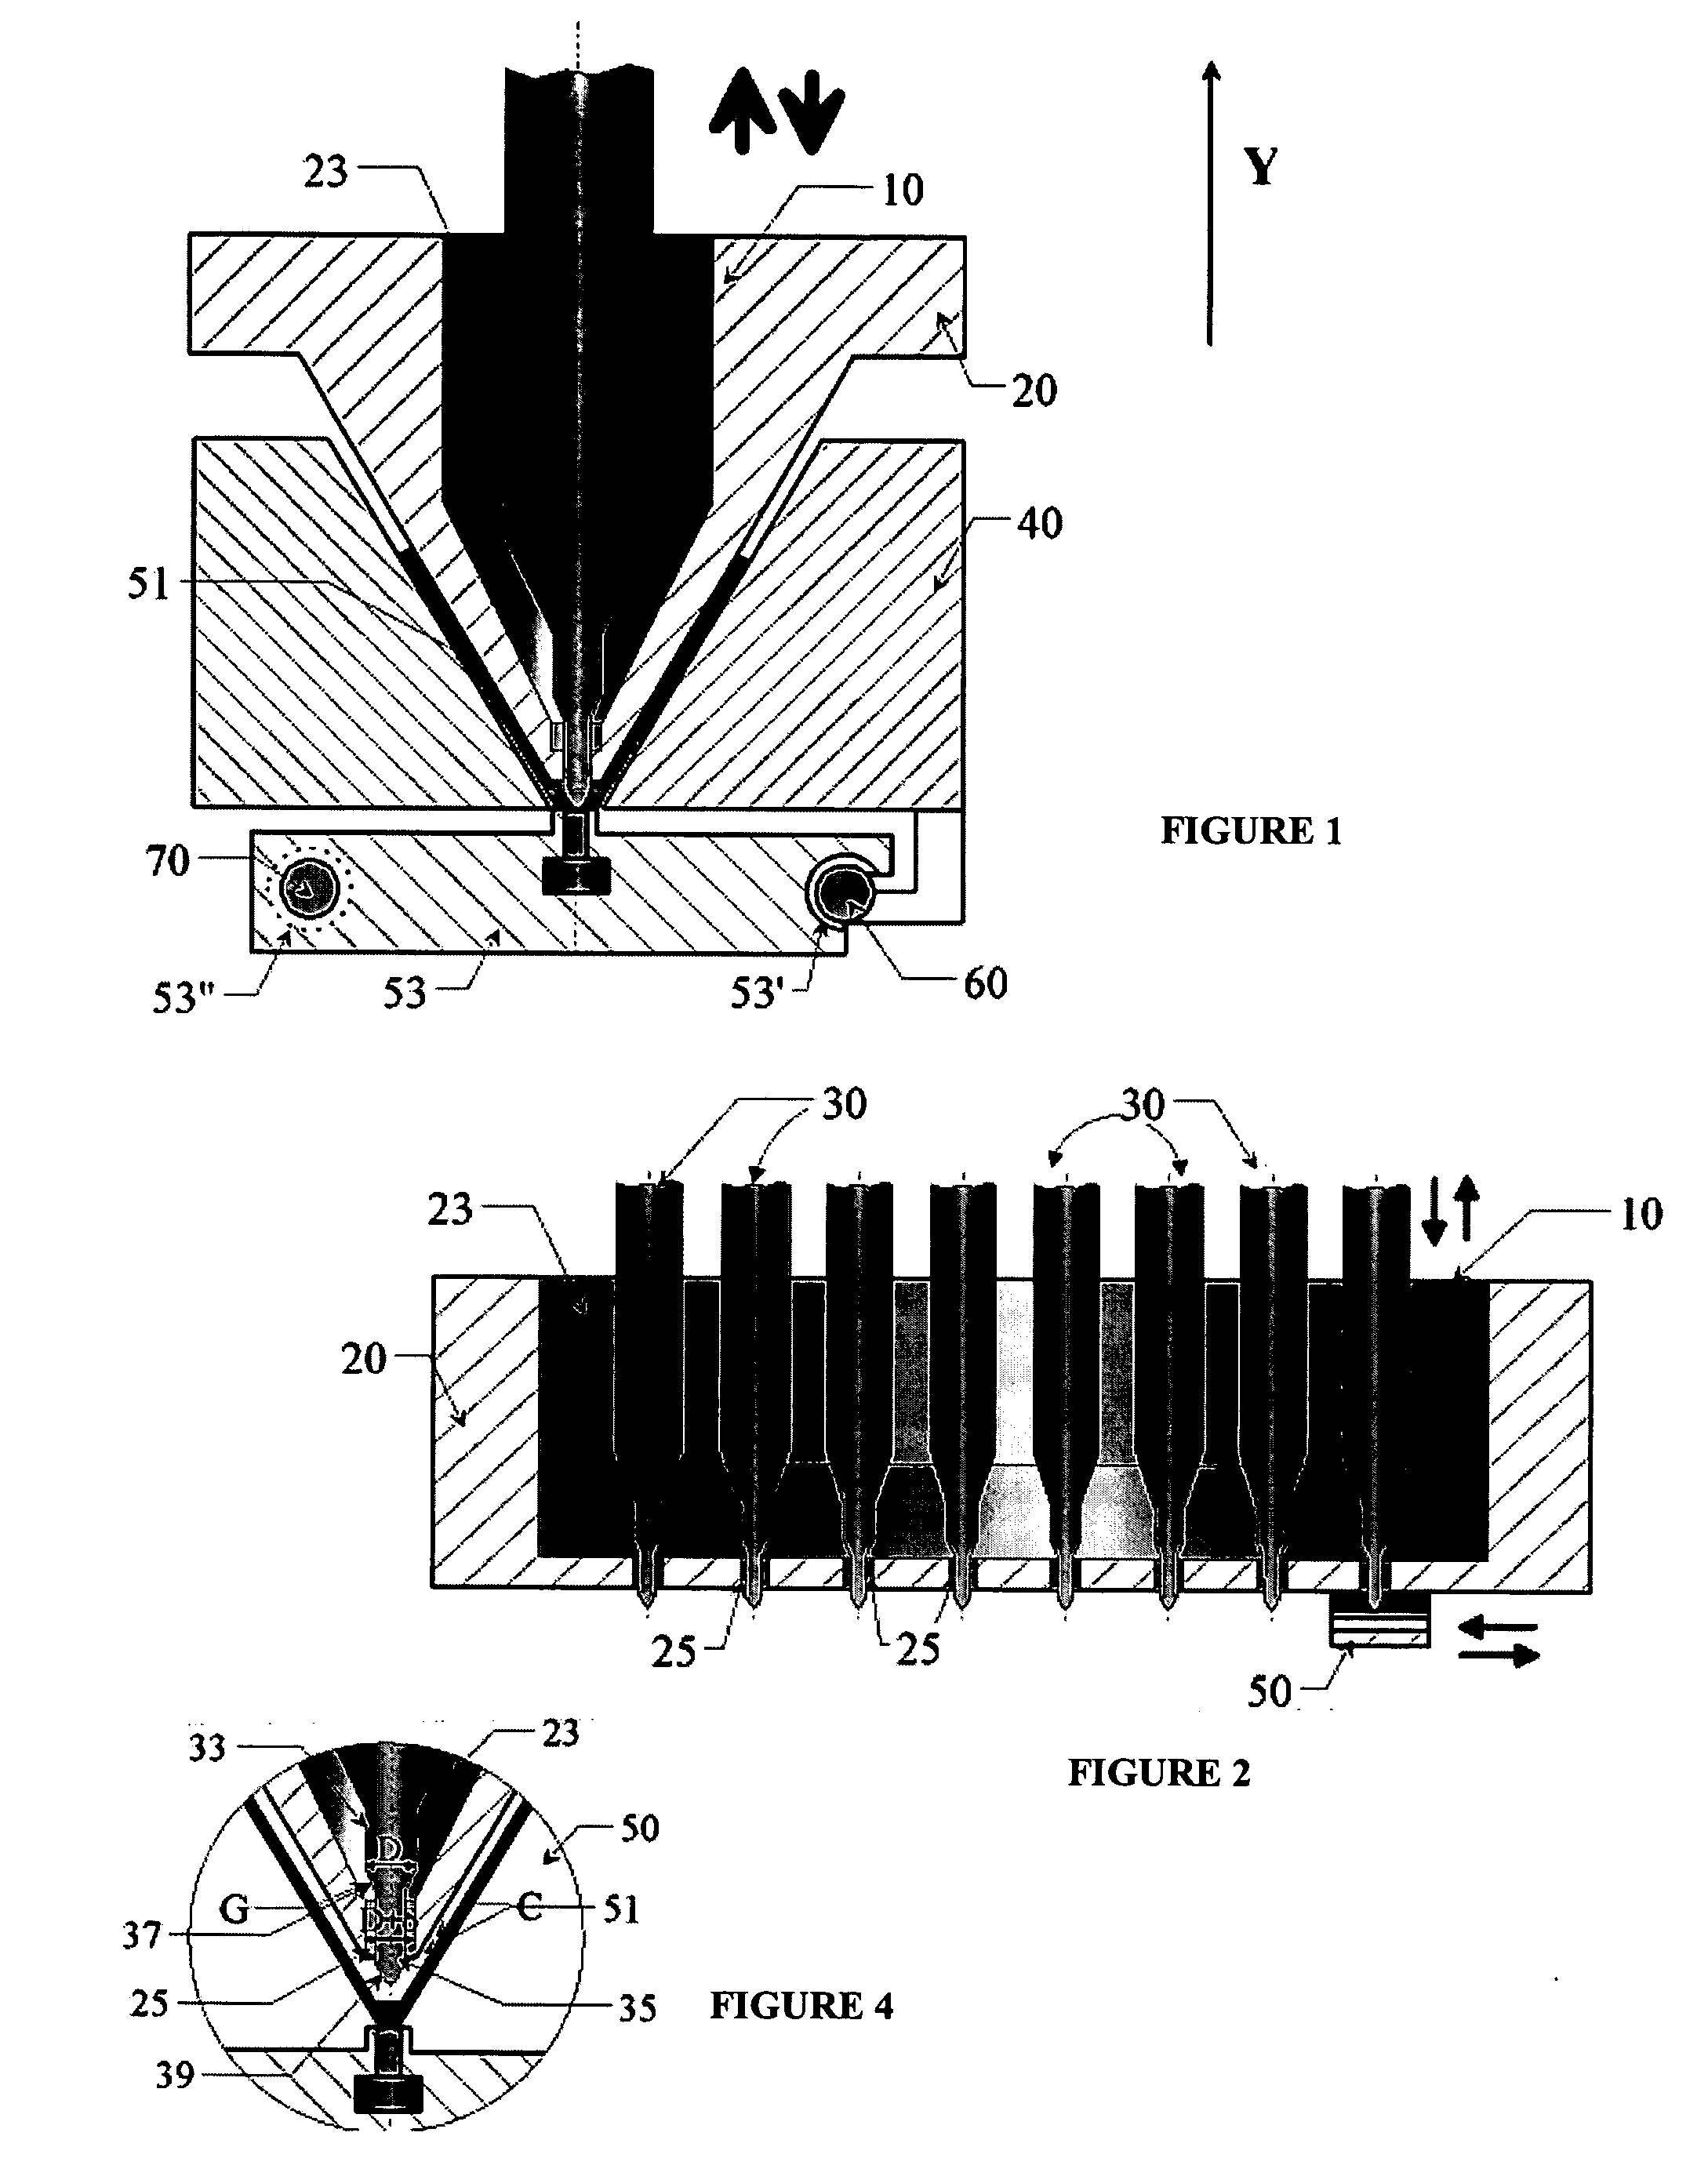 Apparatus for electro-blowing or blowing-assisted electro-spinning technology and process for post treatment of electrospun or electroblown membranes